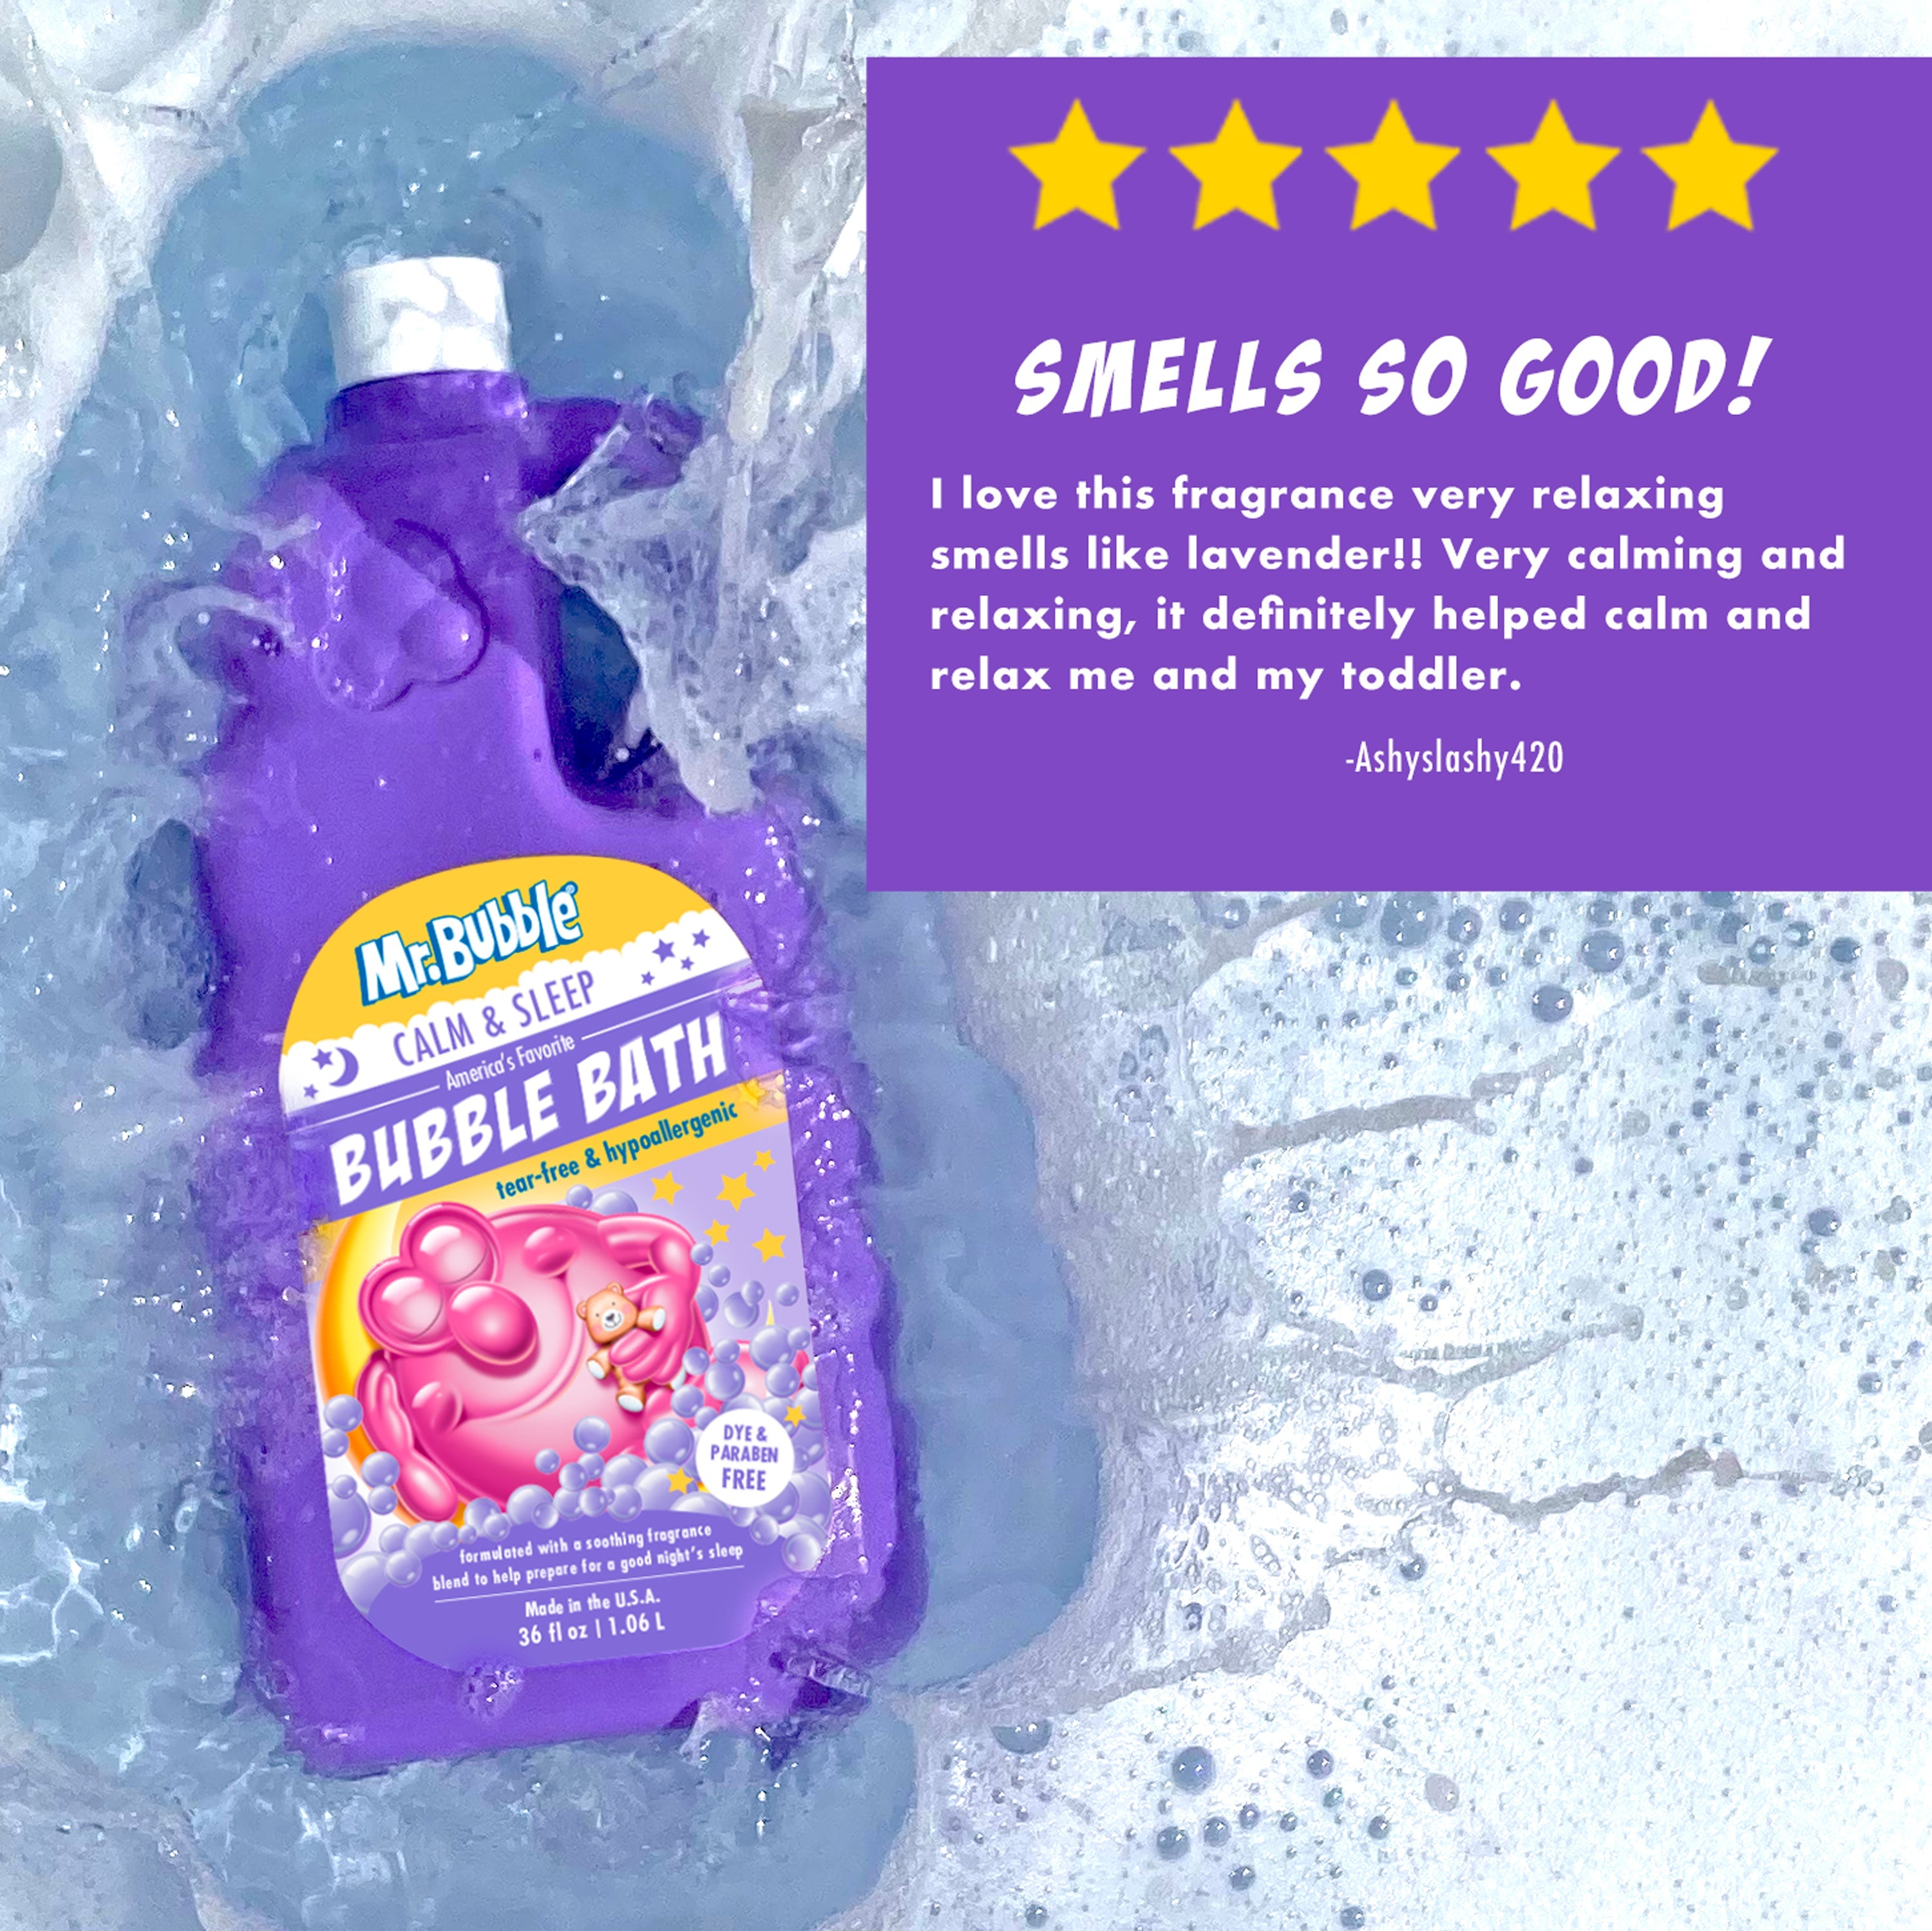  Mr. Bubble Original Bubble Bath - Hypoallergenic, Tear Free Bubble  Bath Solution Makes Big Long Lasting Bubbles for Kids, Toddlers and Adults  (Pack of 2 Bottles, 36 fl oz Each) : Baby